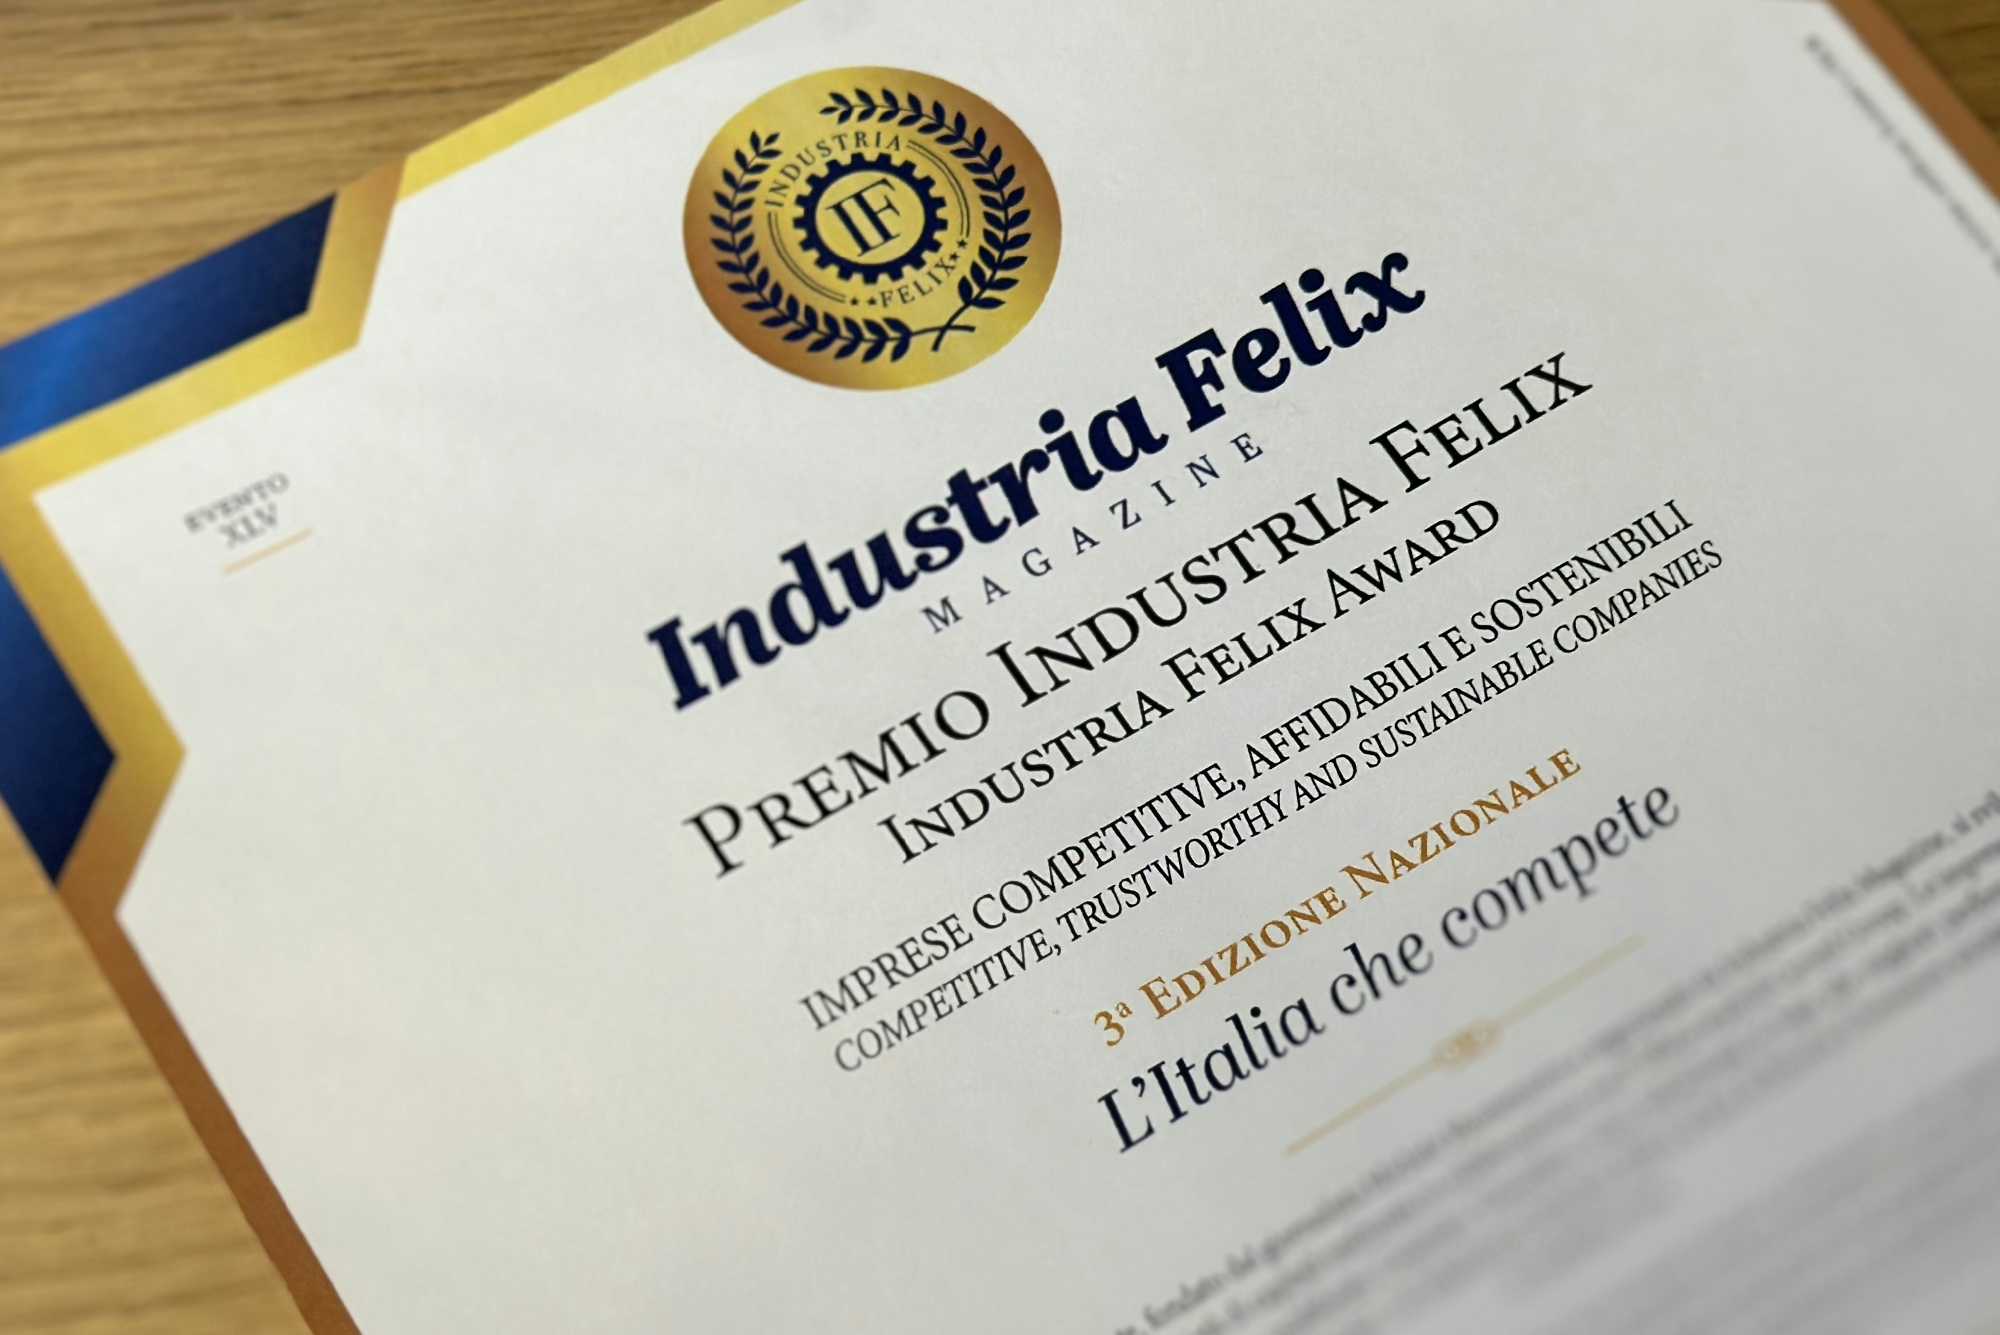 Industria Felix Awards assigned to Catellani &#038; Smith on the 3rd national edition of “L’Italia che compete”